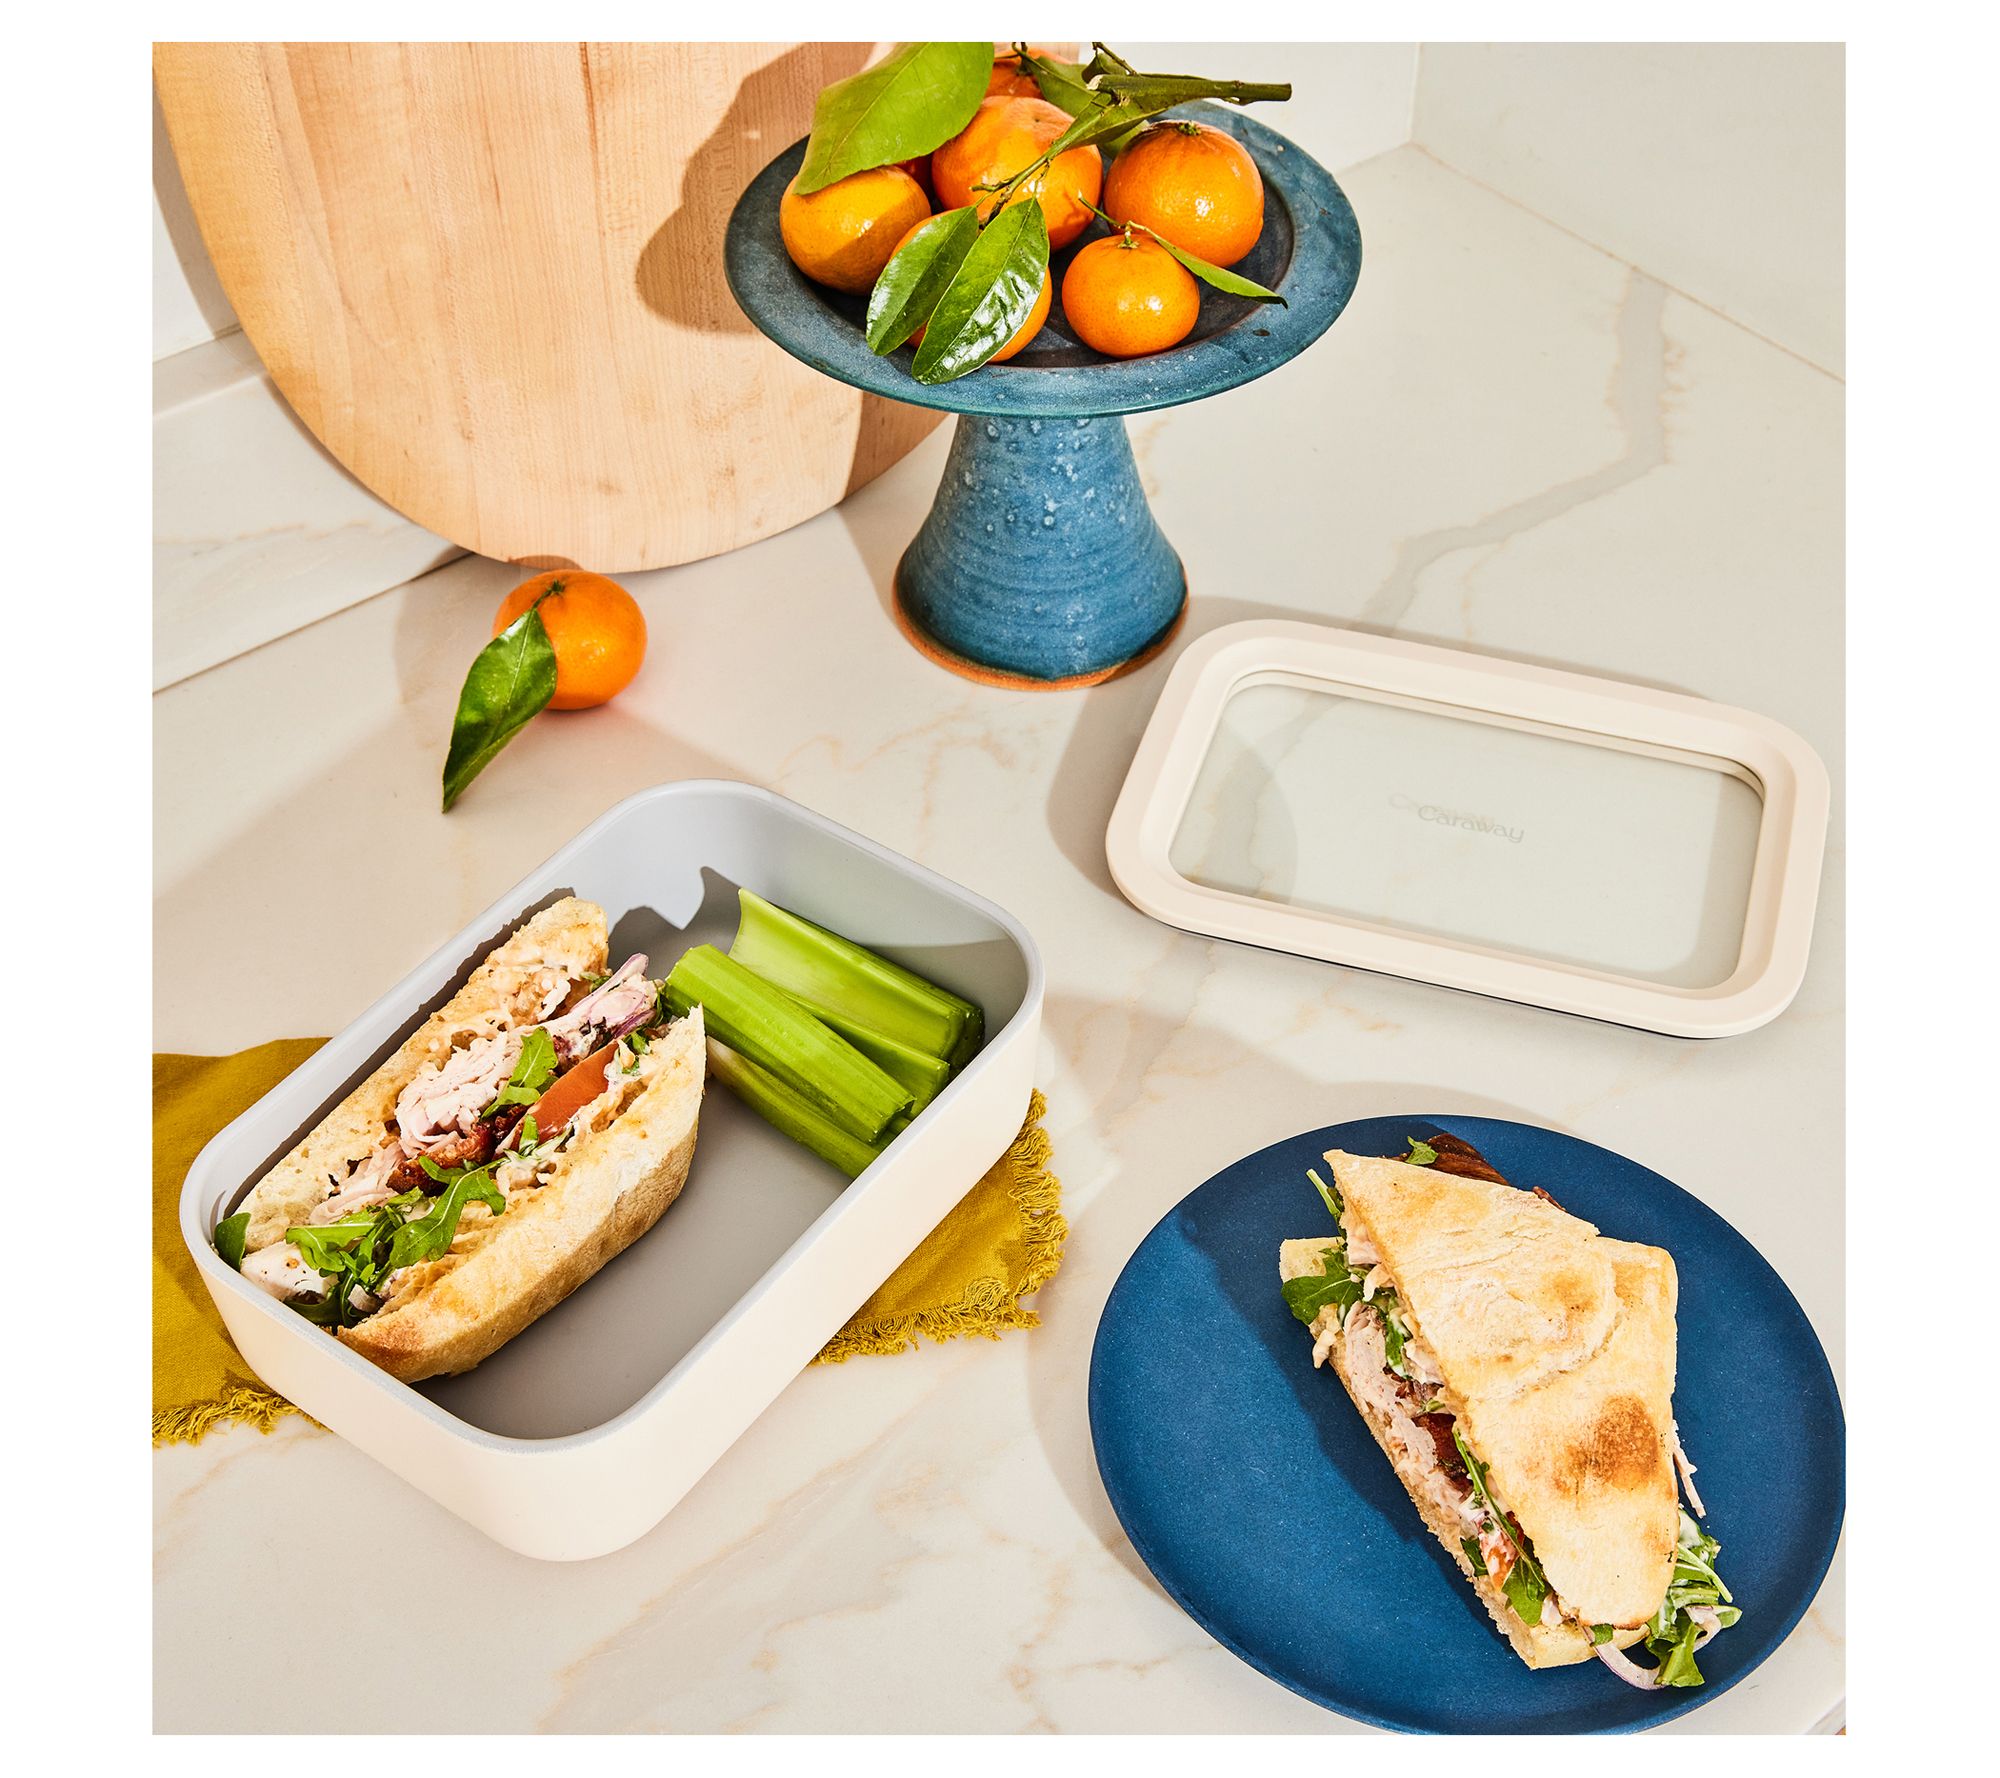 Caraway launches ceramic-coated food storage set to make eating